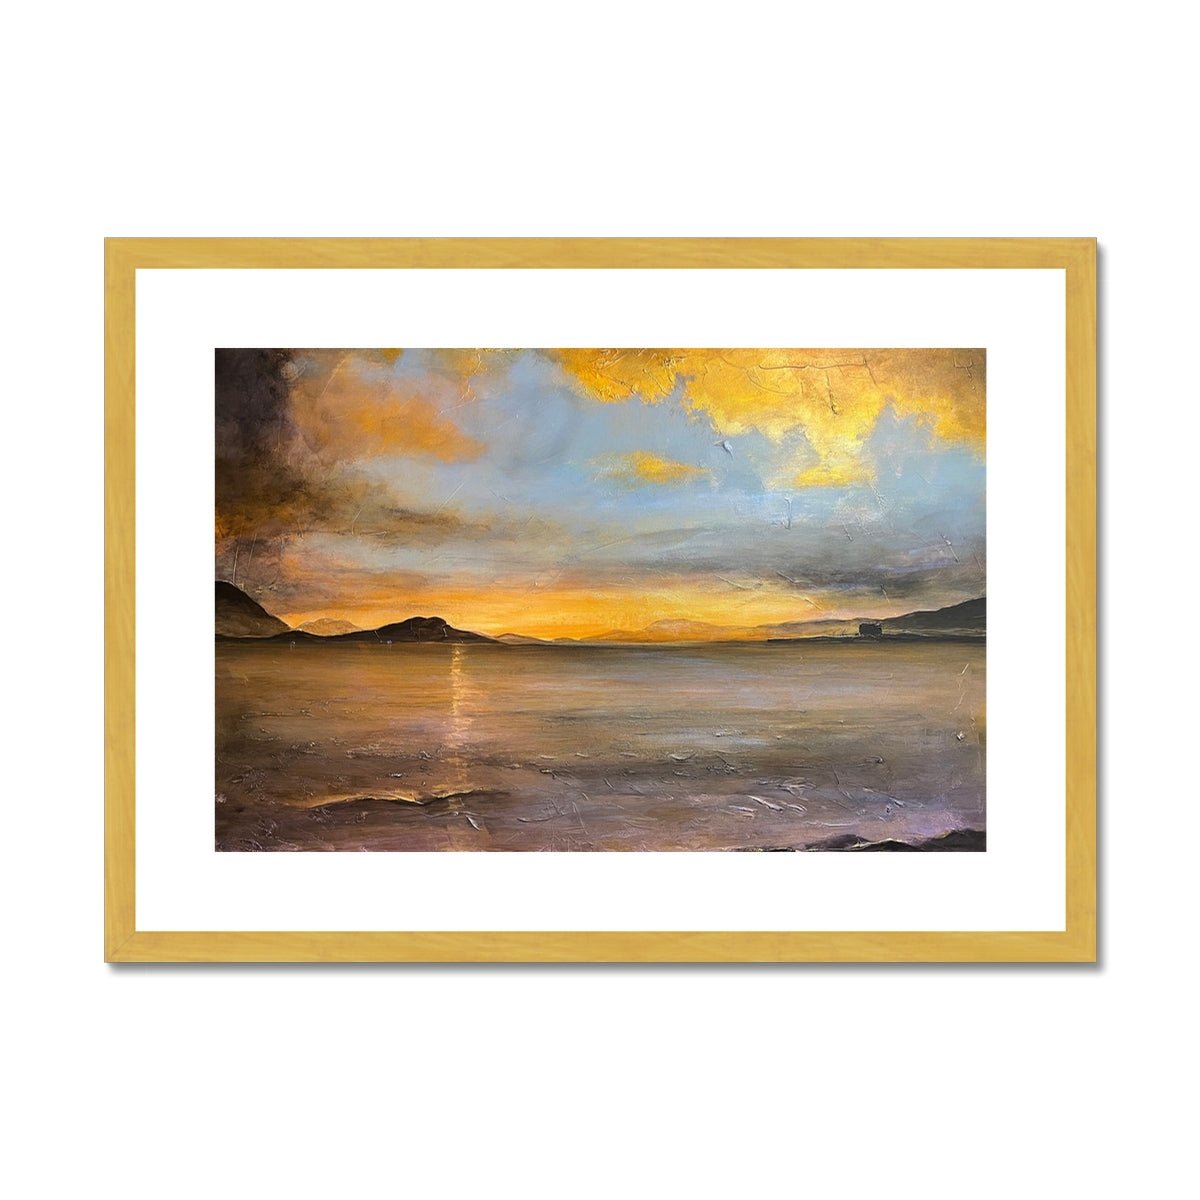 Loch Linnhe Sunset Painting | Antique Framed & Mounted Prints From Scotland-Antique Framed & Mounted Prints-Scottish Lochs & Mountains Art Gallery-A2 Landscape-Gold Frame-Paintings, Prints, Homeware, Art Gifts From Scotland By Scottish Artist Kevin Hunter